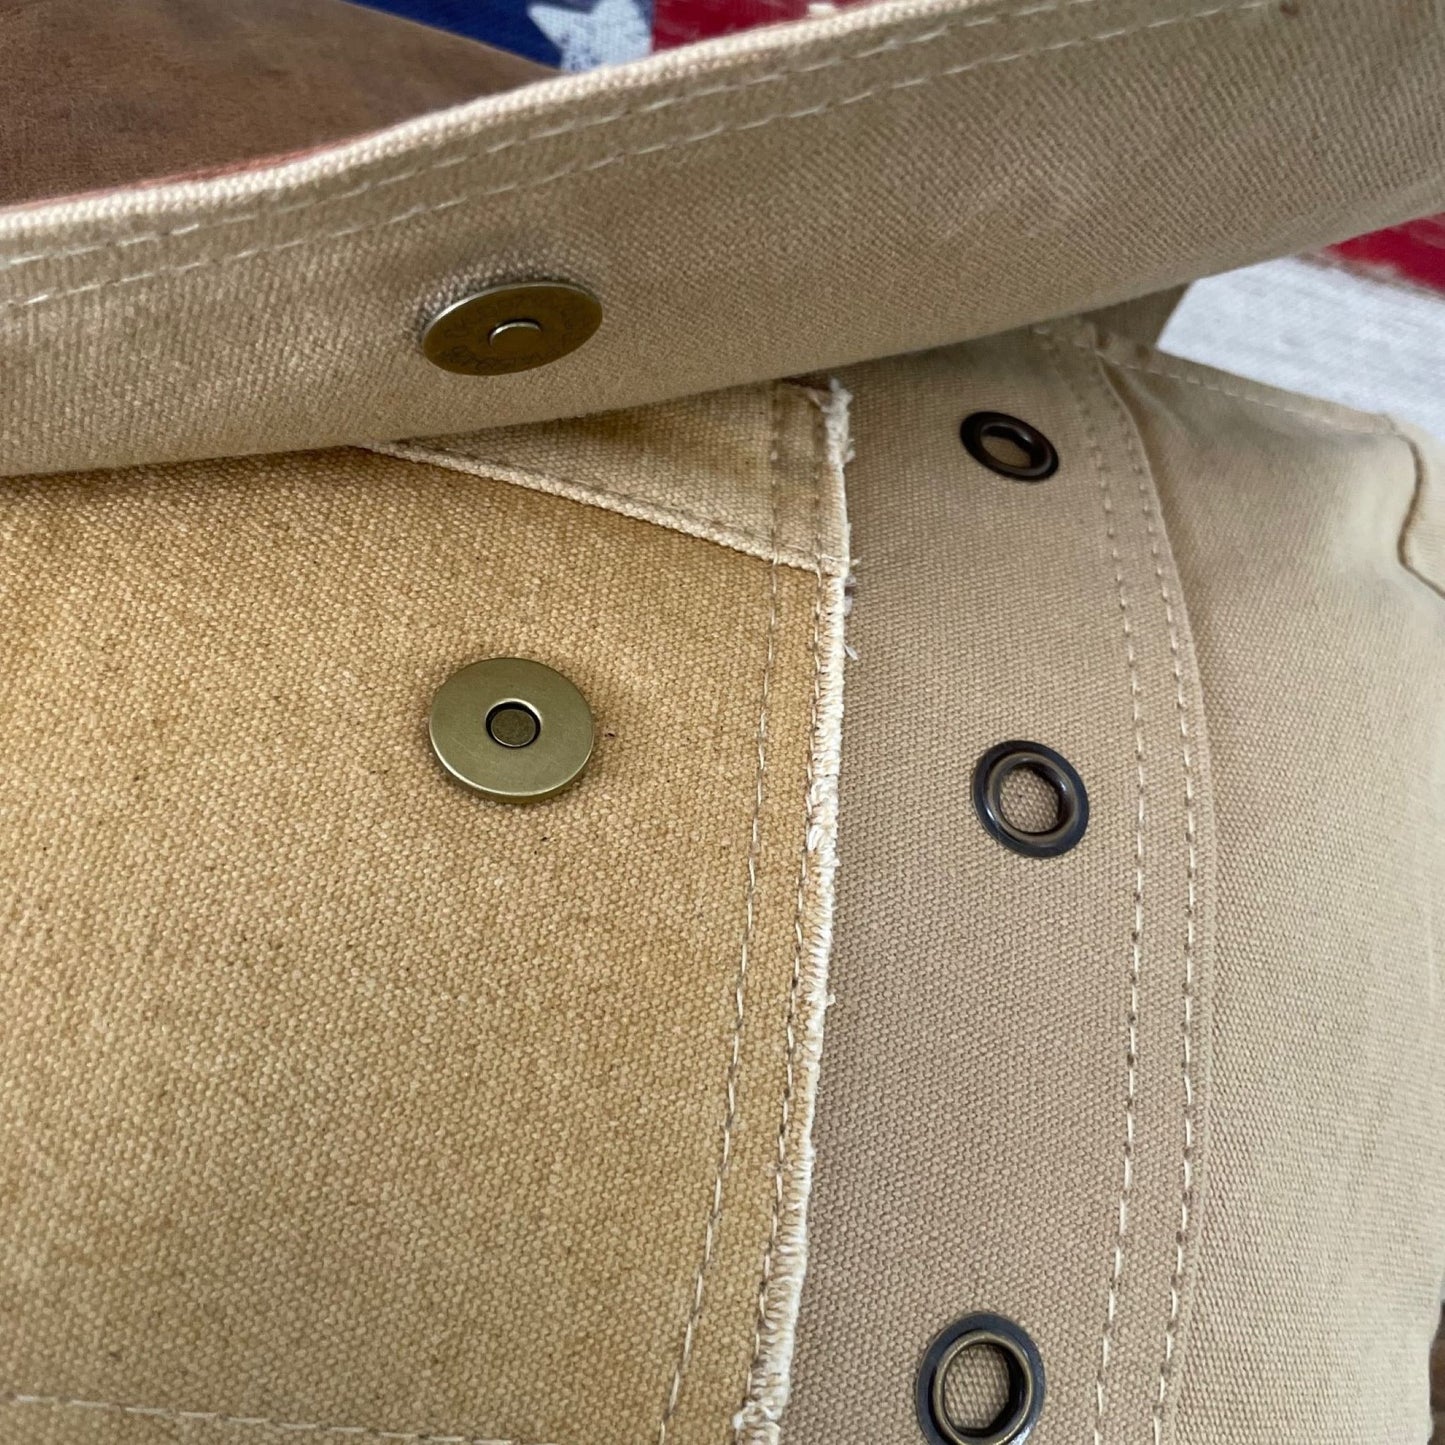 NEW!!  CCW Concealed Carry Canvas Crossbody Bag with Dual Access